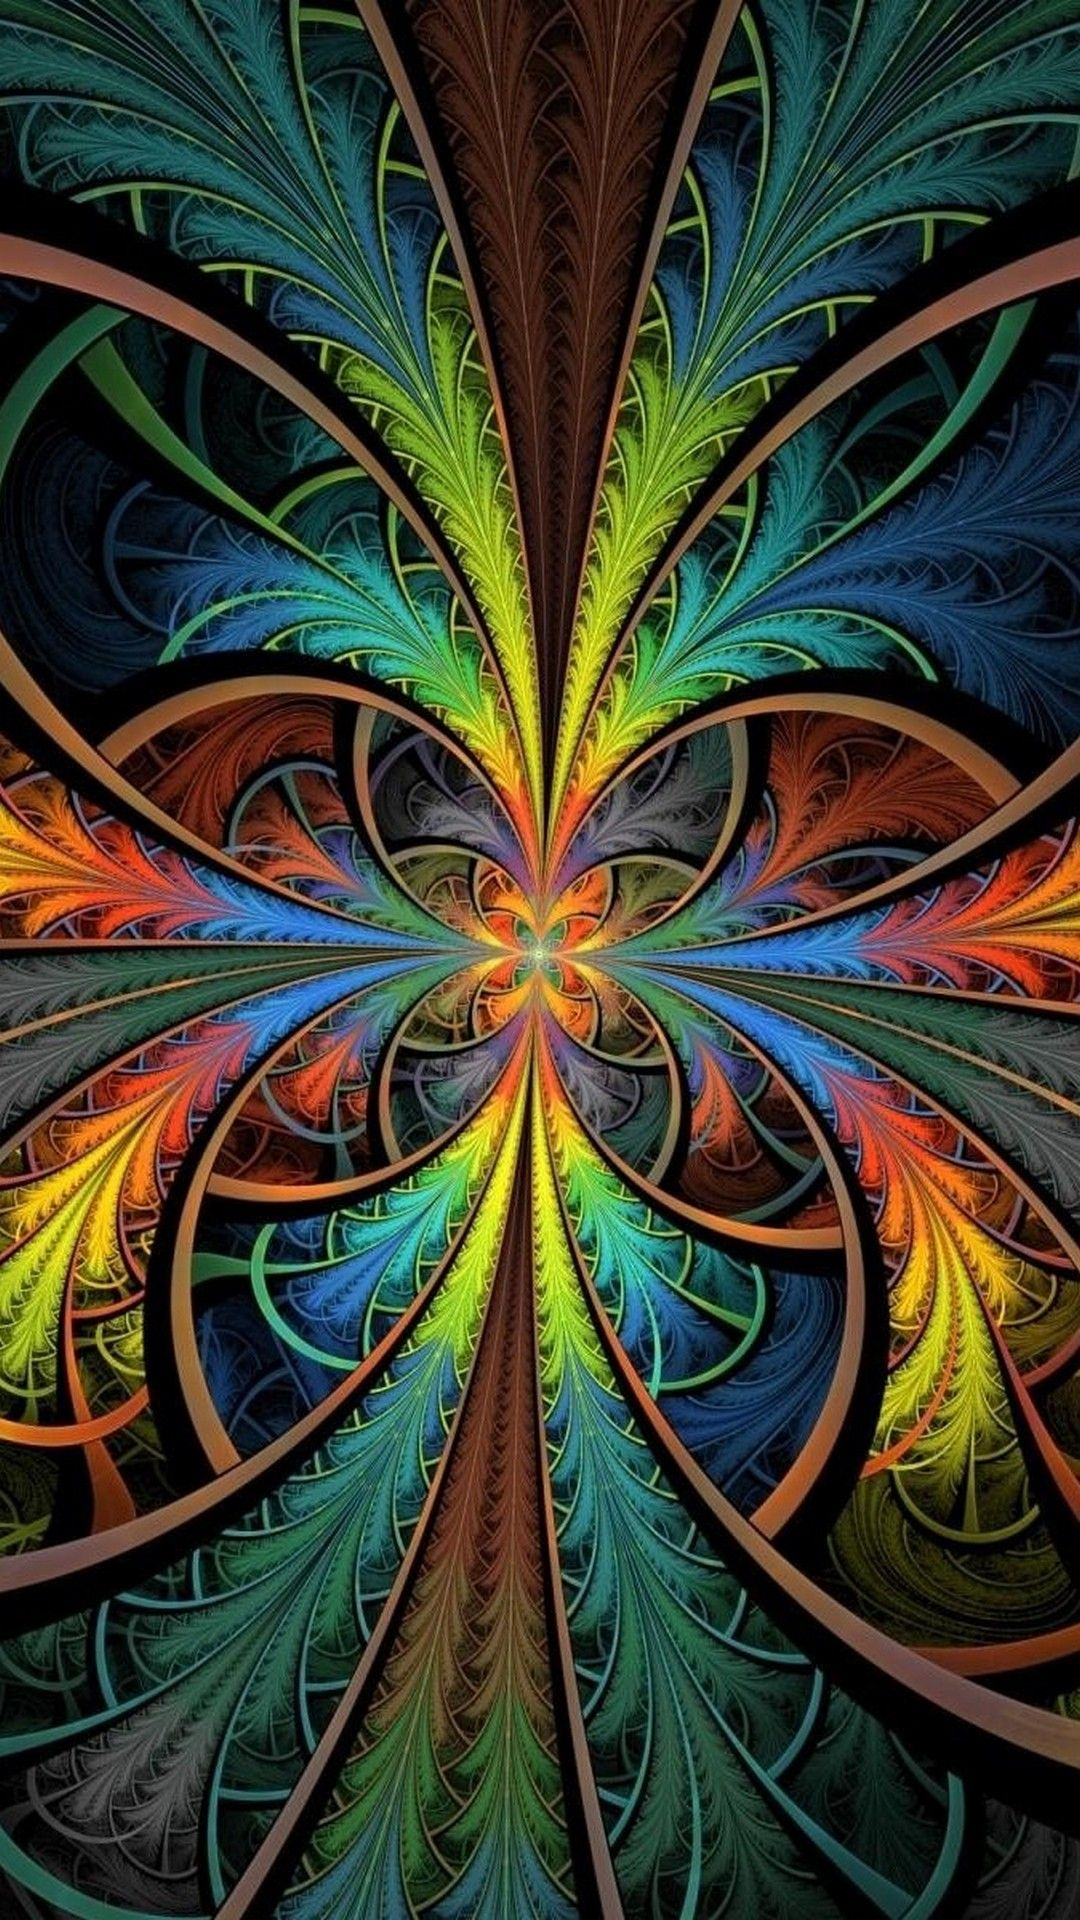 1080x1920 Psychedelic Wallpaper For iPhone Best iPhone Wallpaper | Trippy wallpaper, Psychedelic art, Fractal art